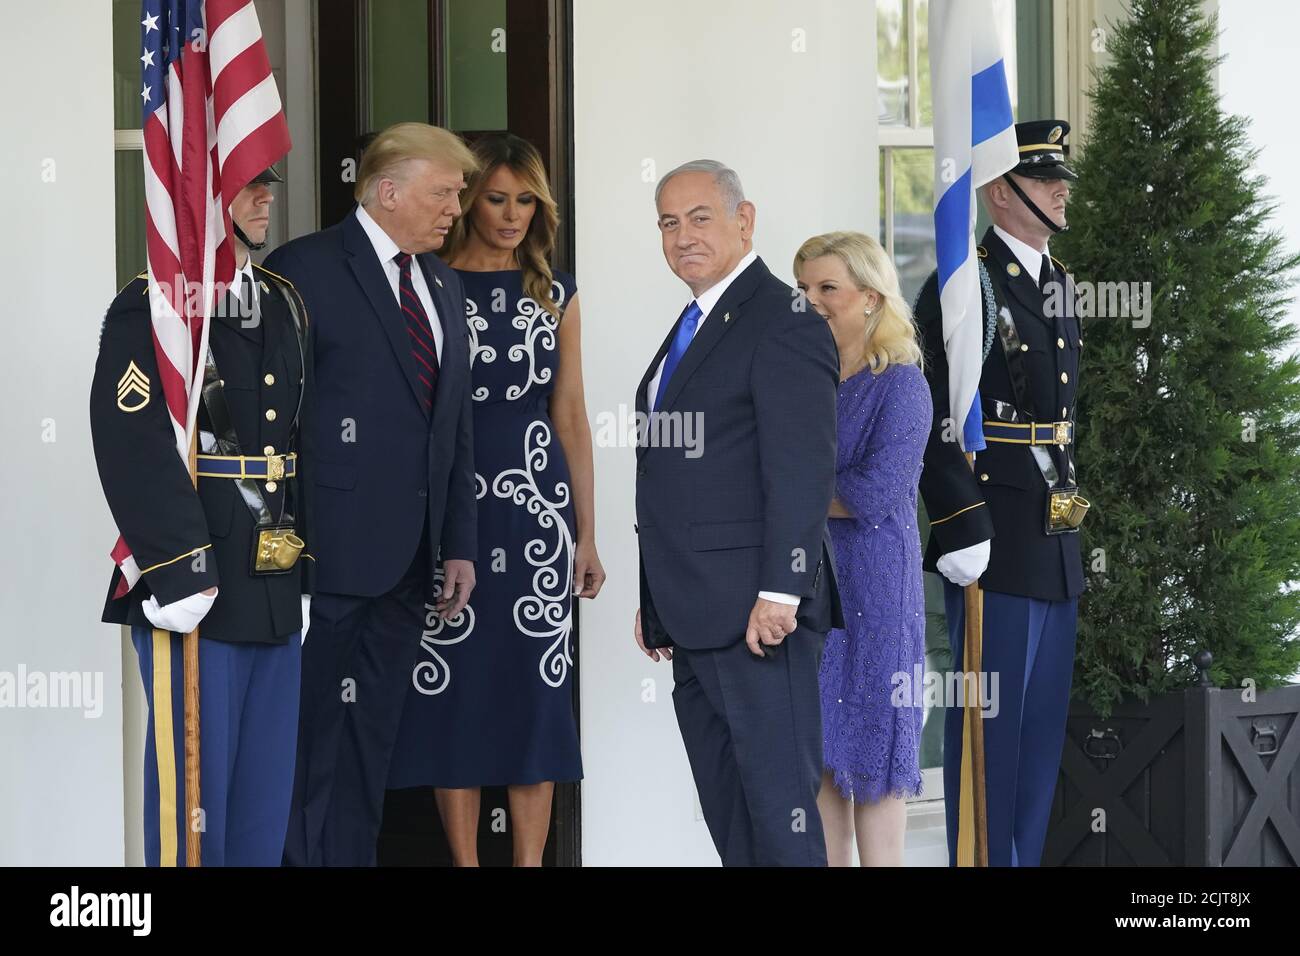 United States President Donald J. Trump and first lady Melania Trump welcomes Prime Minister Benjamin Netanyahu of Israel, and his wife Sara, to the White House in Washington, DC on Tuesday, September 15, 2020. Netanyahu is in Washington to sign the Abraham Accords, a peace treaty with the State of Israel.Credit: Chris Kleponis/Pool via CNP /MediaPunch Stock Photo